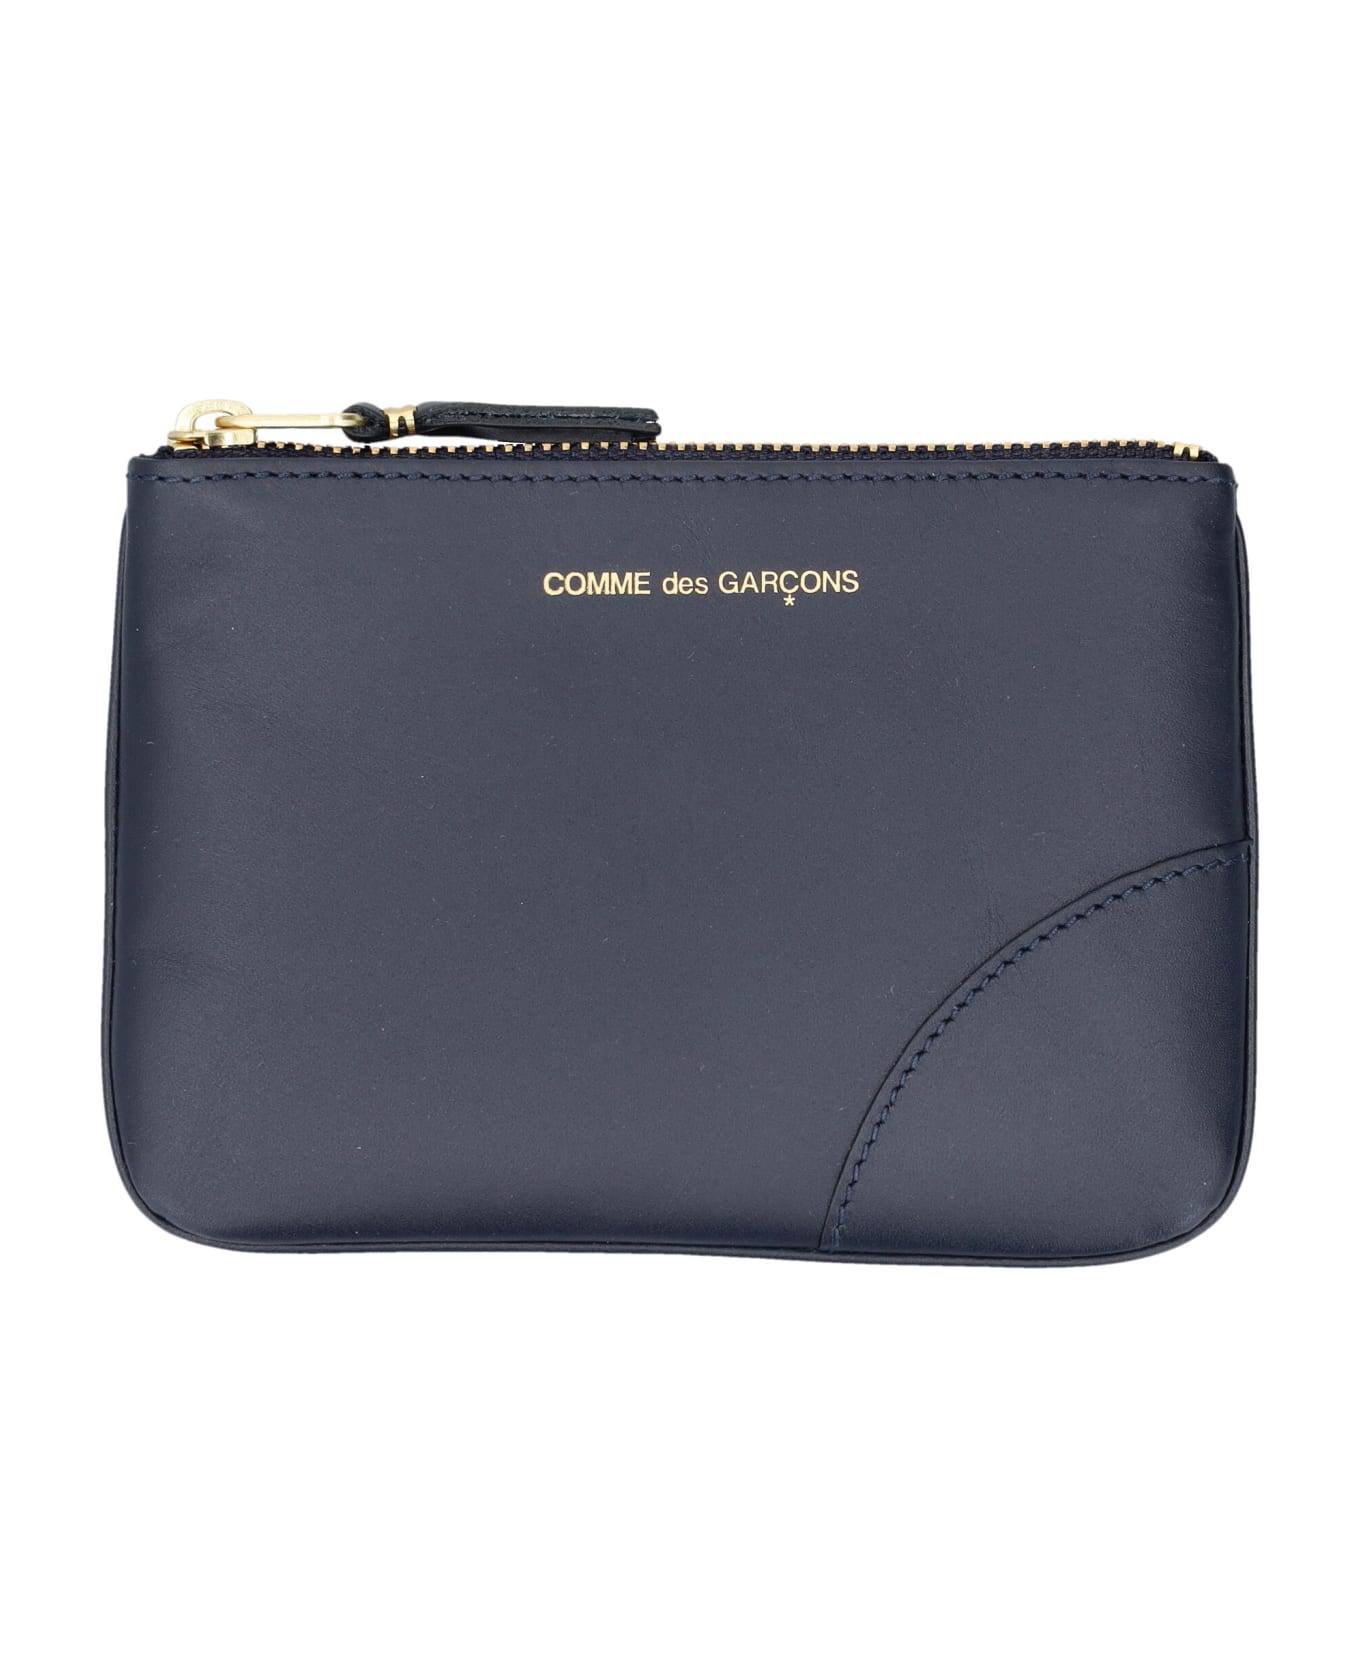 Comme des Garçons Wallet Xsmall Classic Leather Pouch - NAVY バッグ